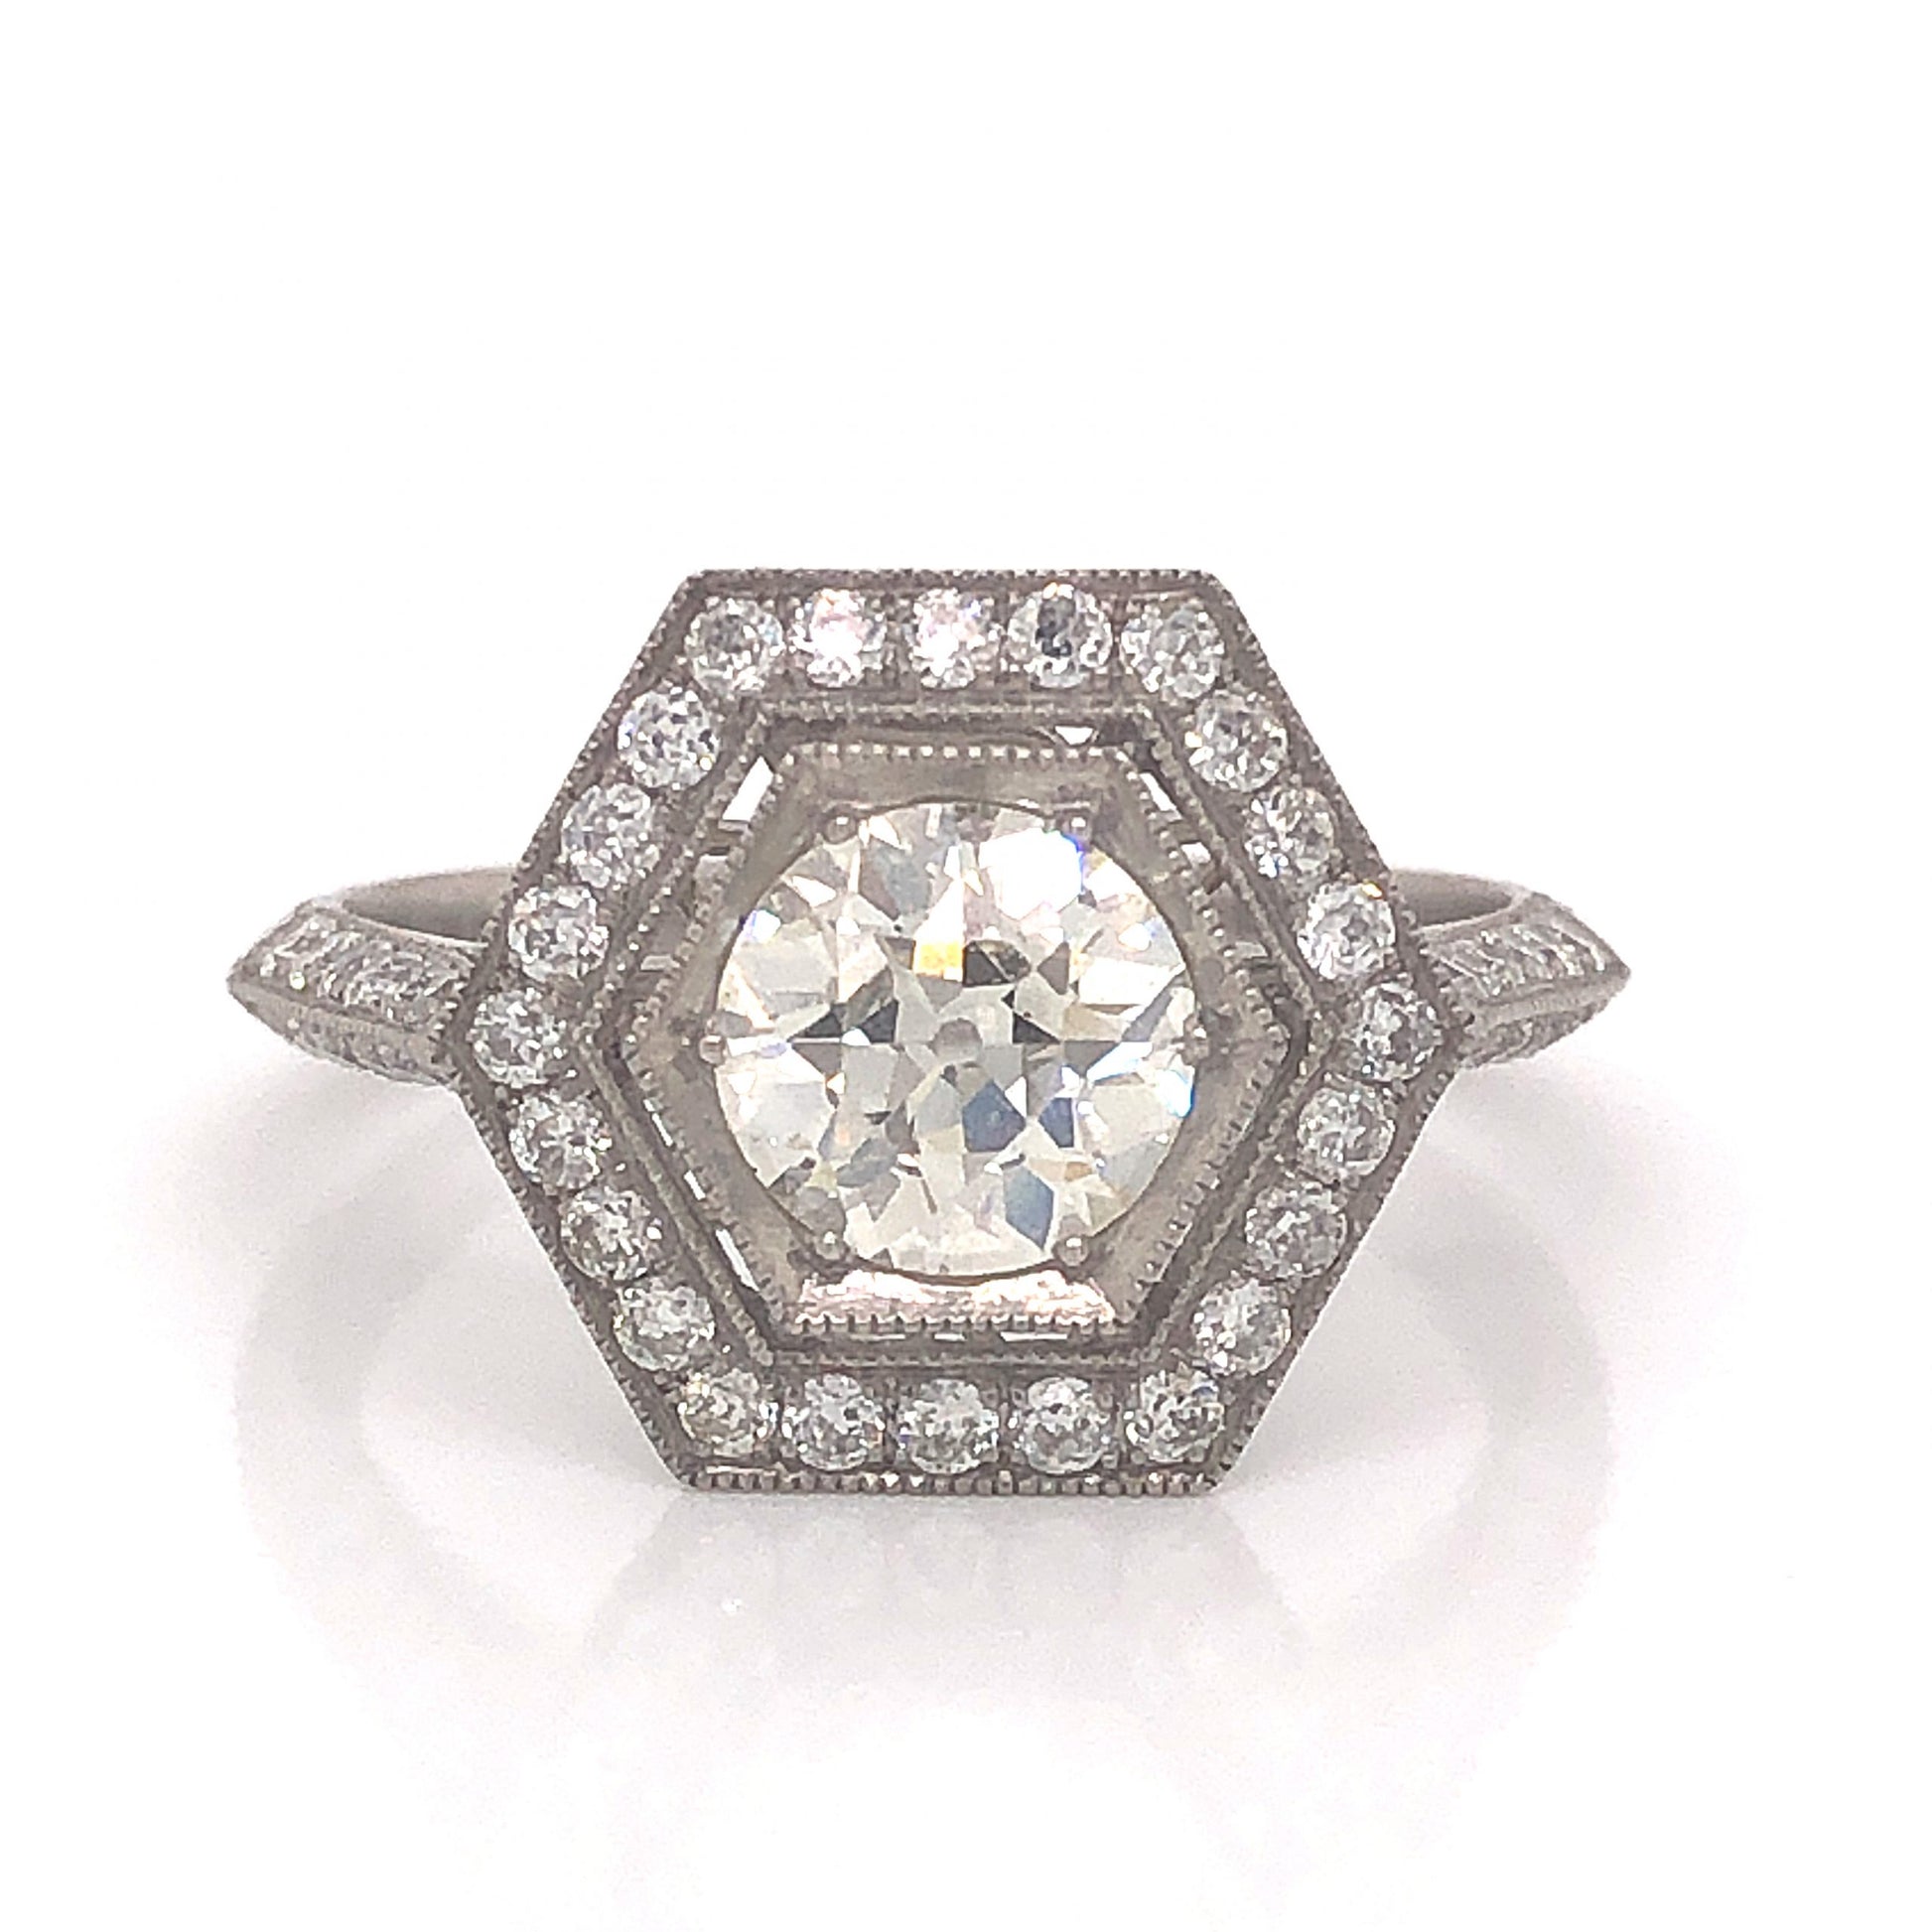 Hexagon Antique Inspired Diamond Engagement Ring in PlatinumComposition: Platinum Ring Size: 6.5 Total Diamond Weight: 1.44ct Total Gram Weight: 4.1 g Inscription: Plat Sophia D.
      